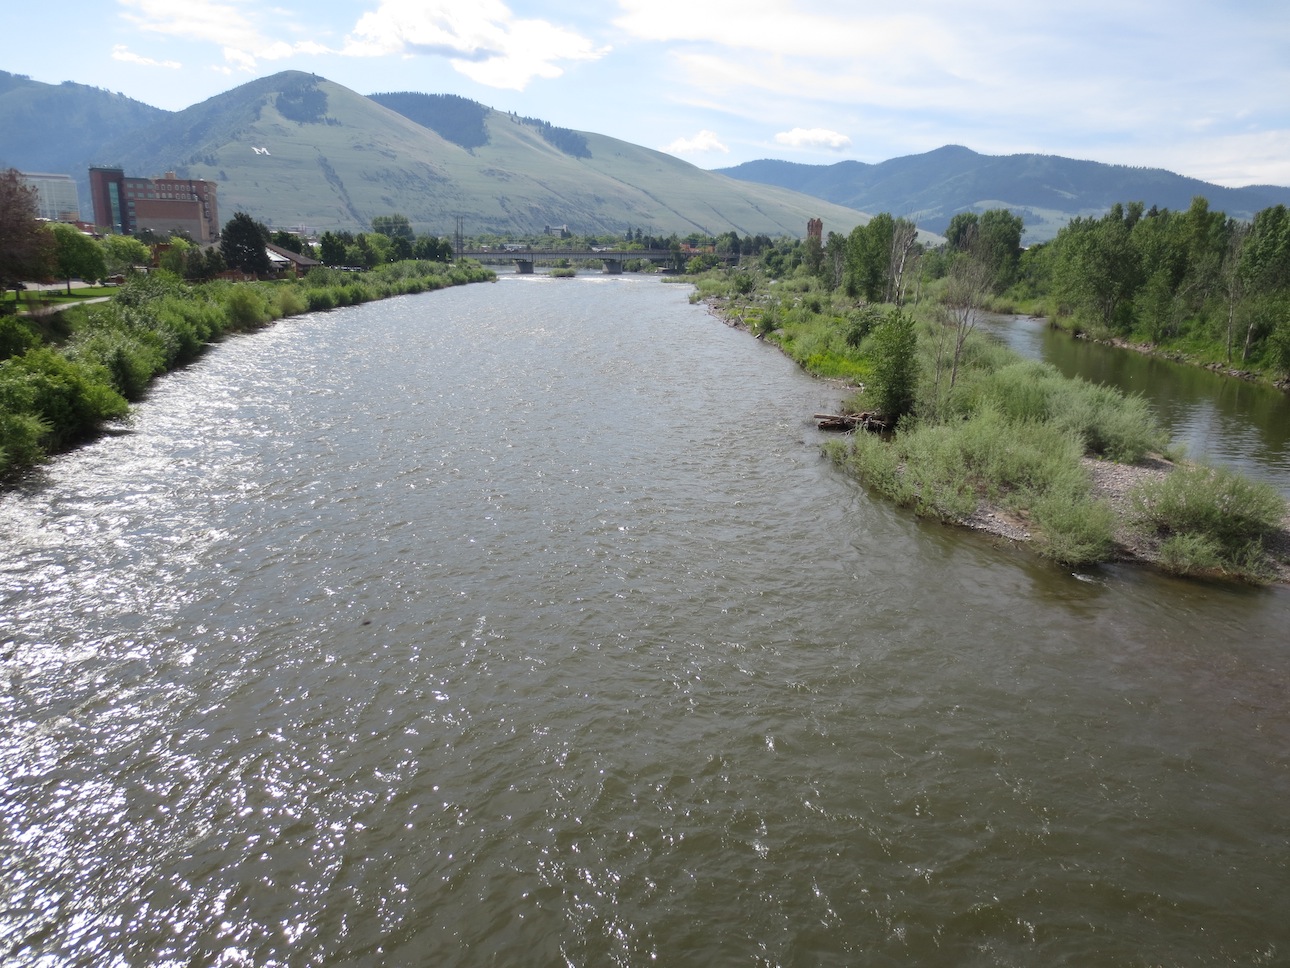 A view of the Clark Fork River from one of the bridges.